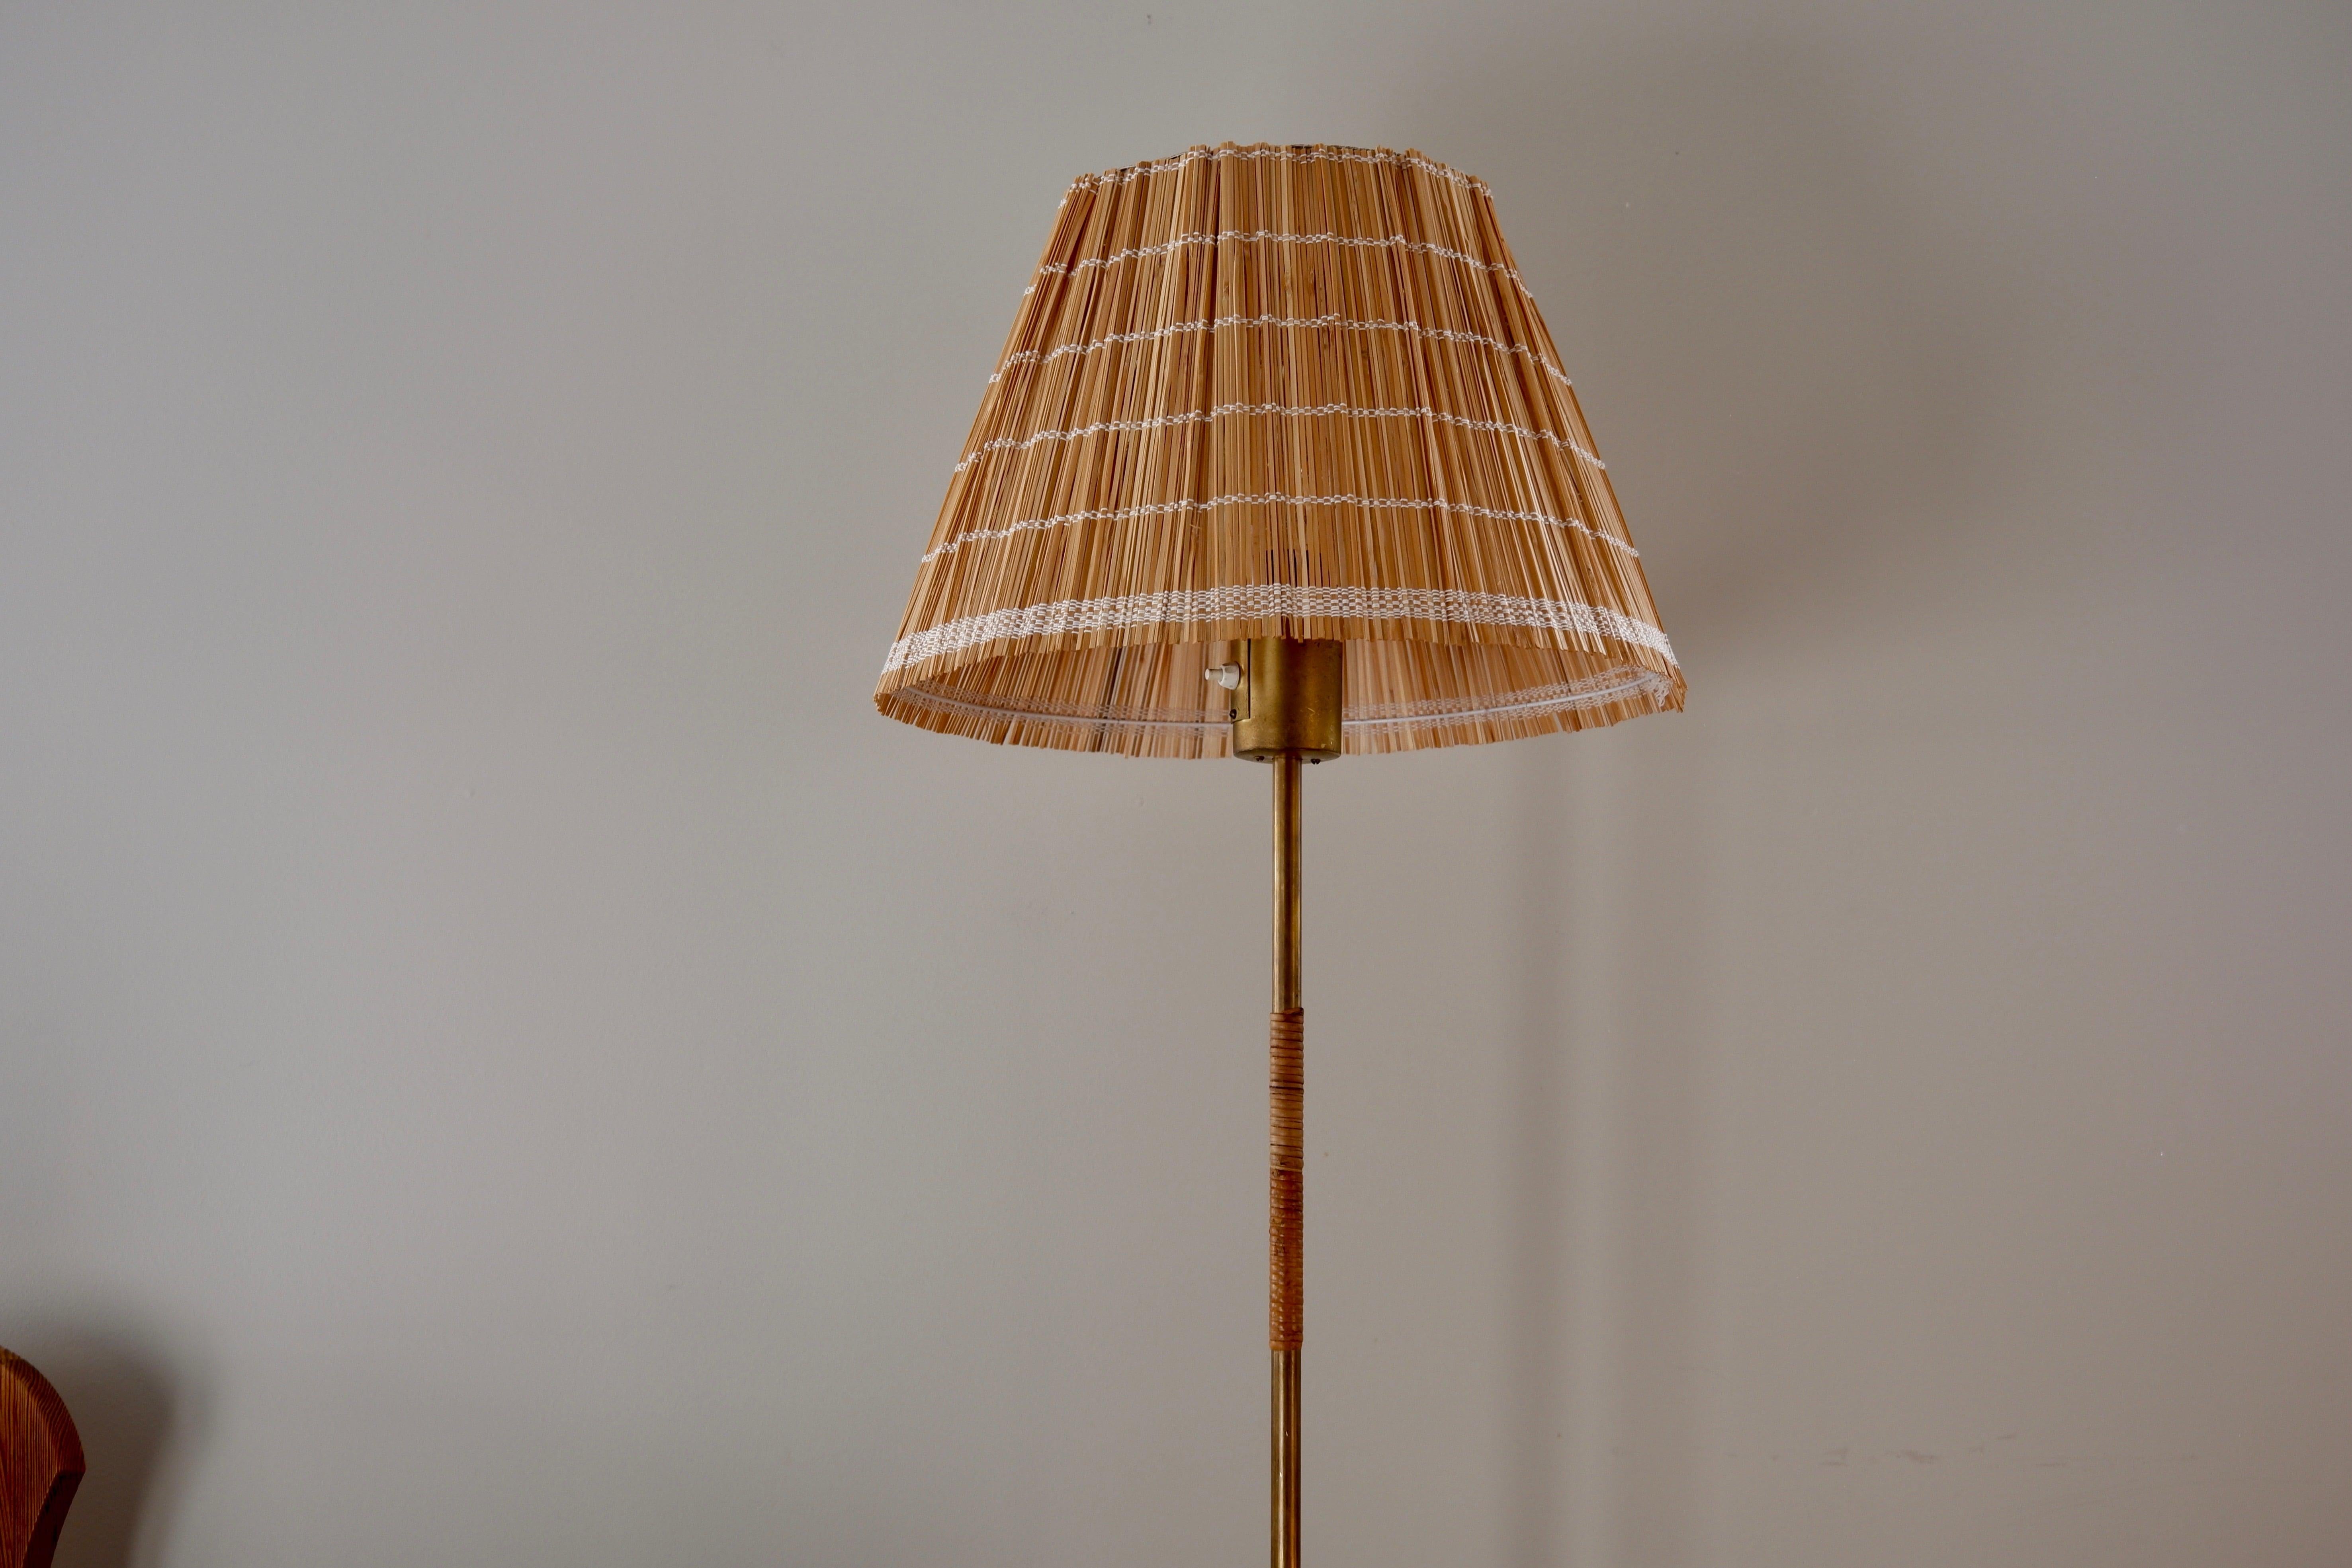 Impressive Paavo Tynell floor lamp design in the 50's and produced by IDMAN. The fllor lamp has a brass feet, core and head with a single lighting switch on top. the brass core is decorated with rattan which is orginal. The lamp is stamp by the